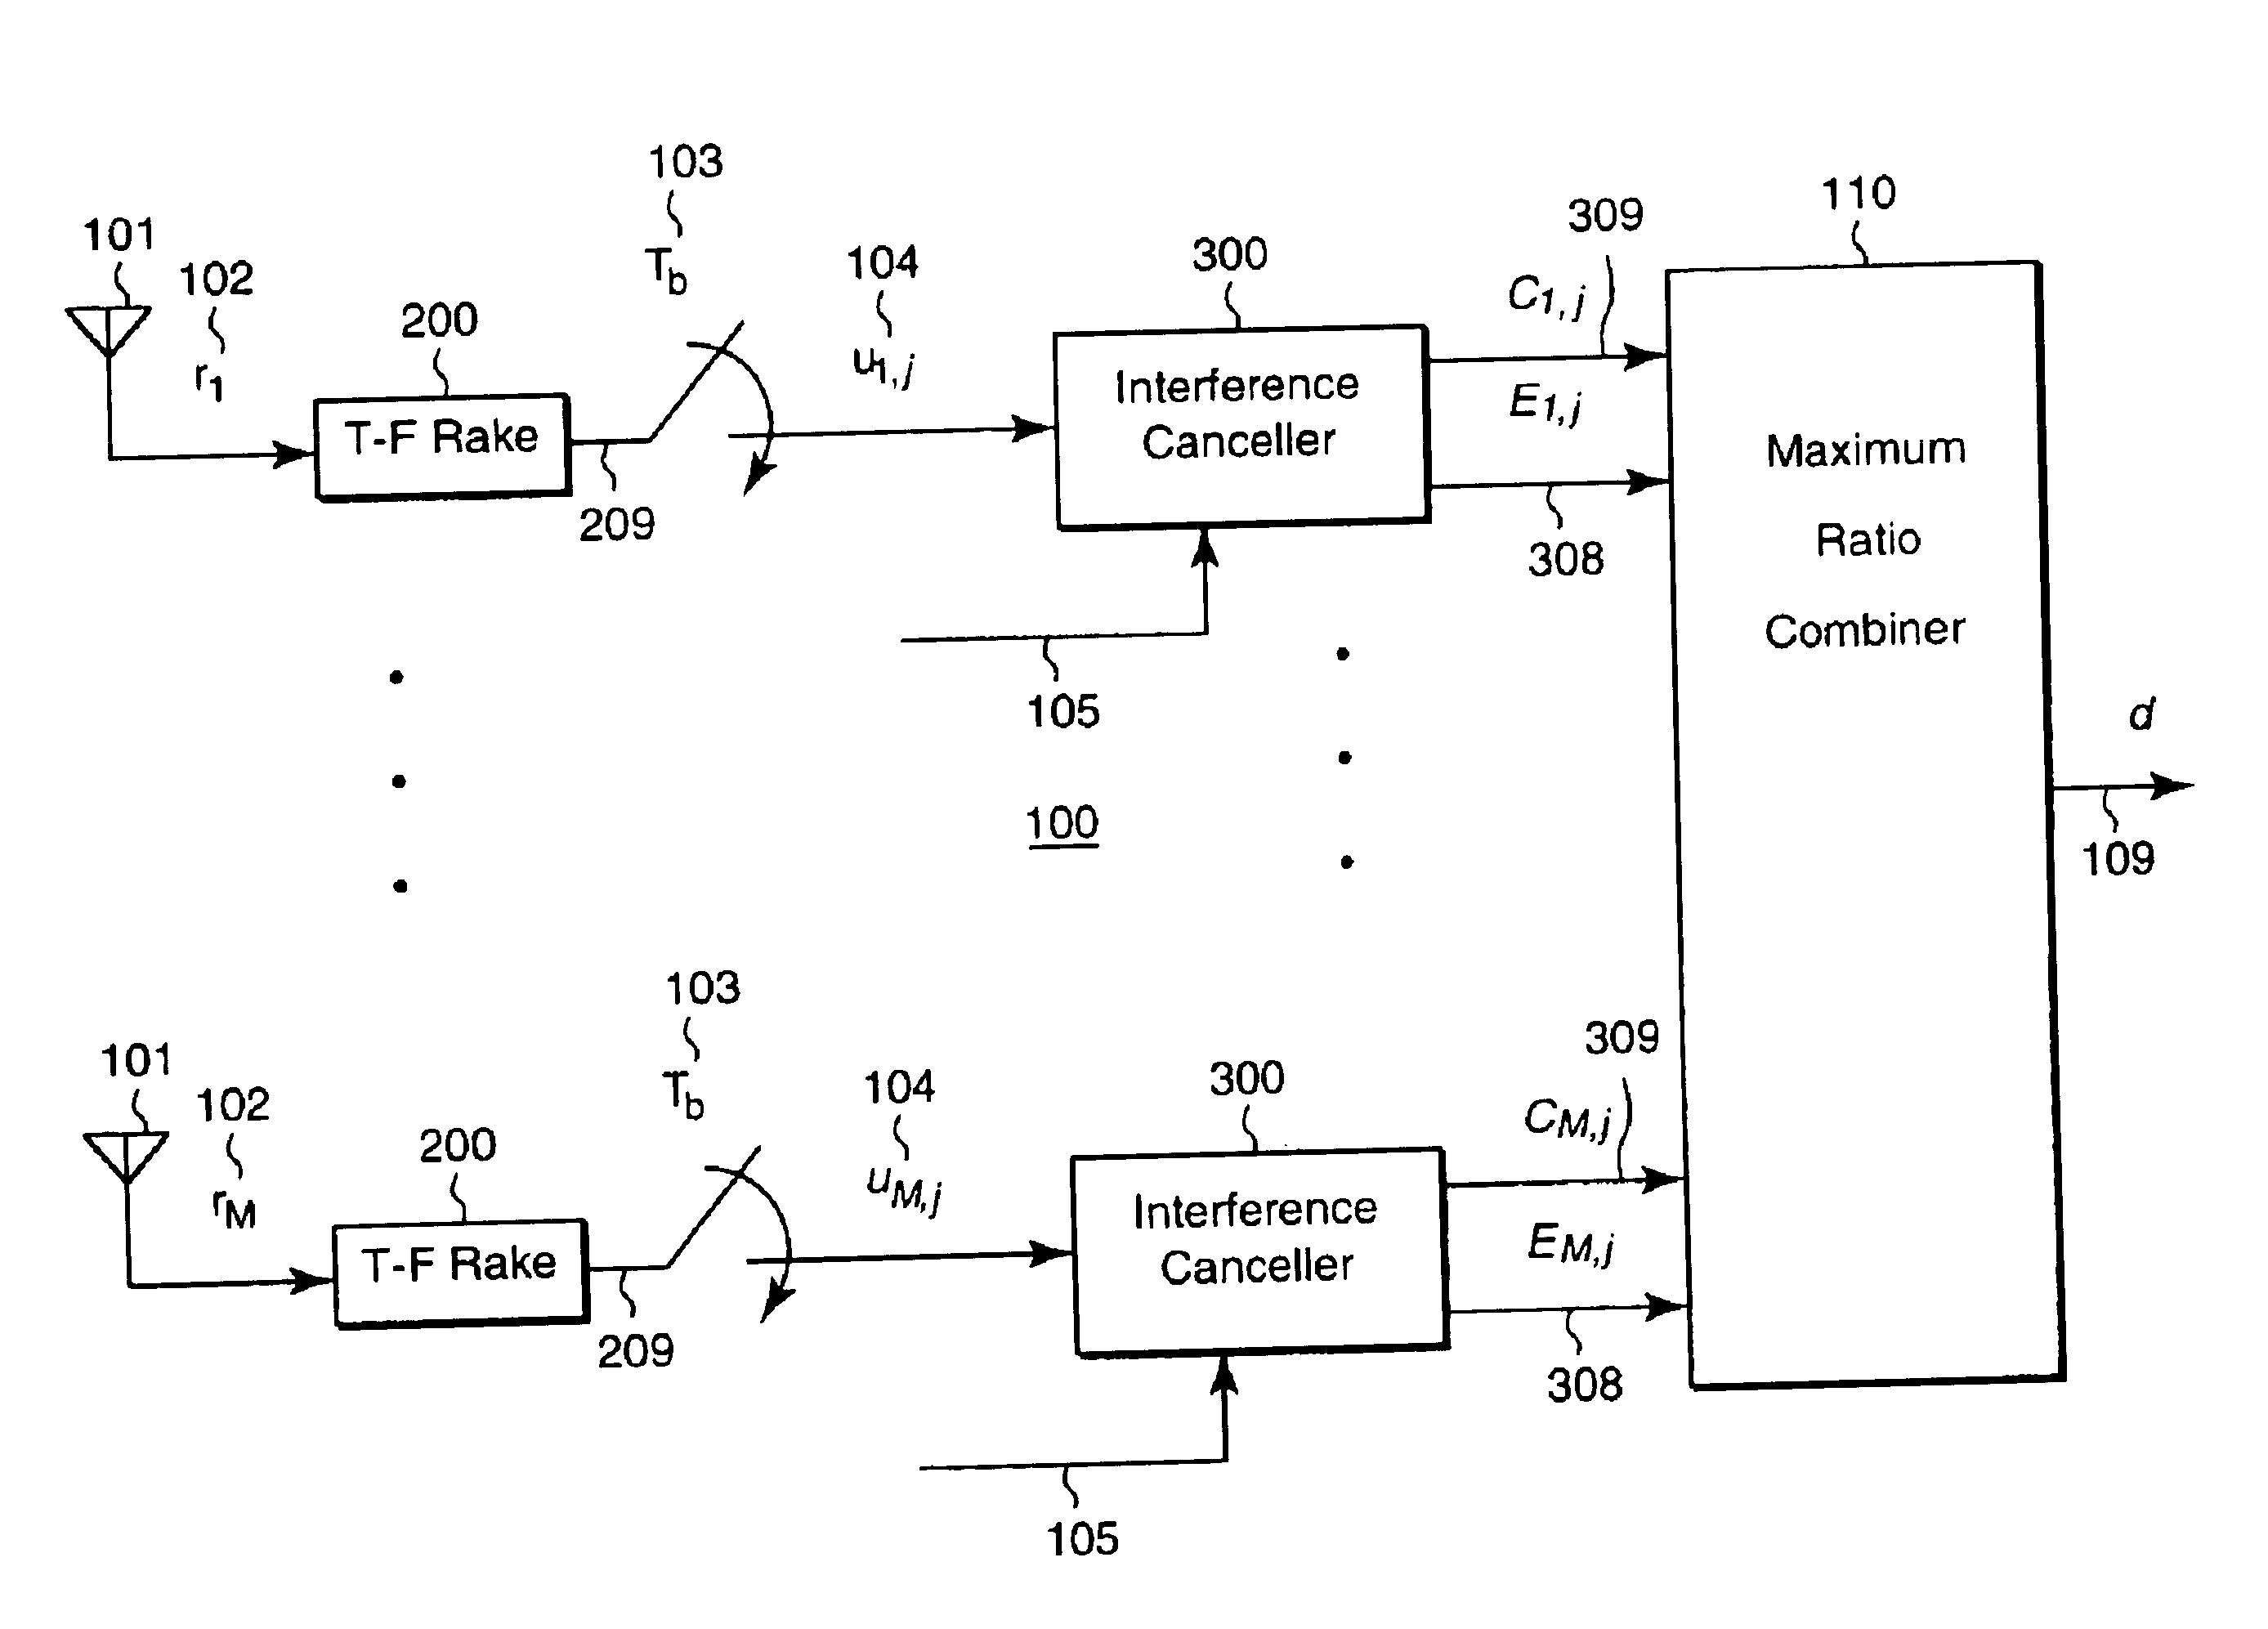 Adaptive DS-CDMA multi-user receiver with diversity combining for interference cancellation